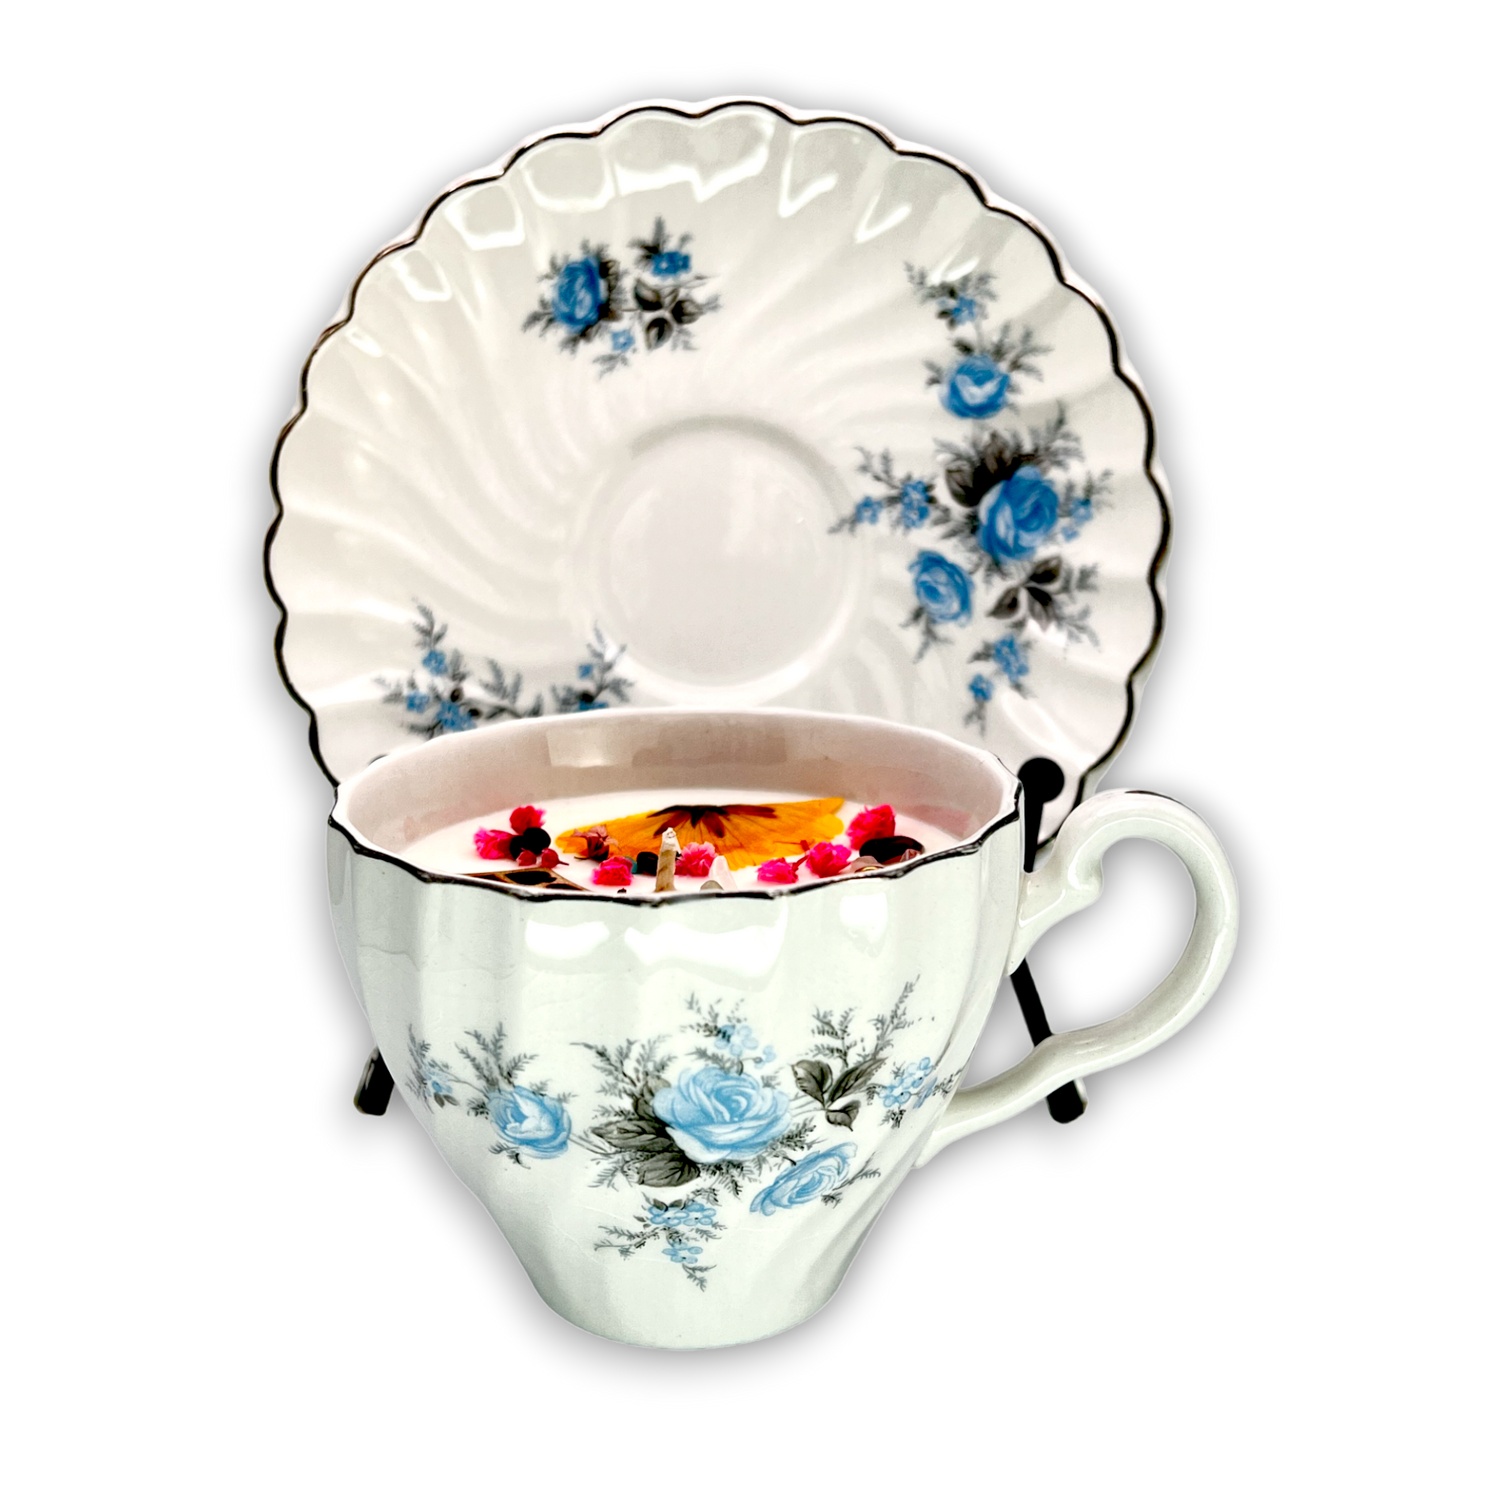 American Vintage Teacup Candles Collection: Timeless Allure with Patriotic Charm